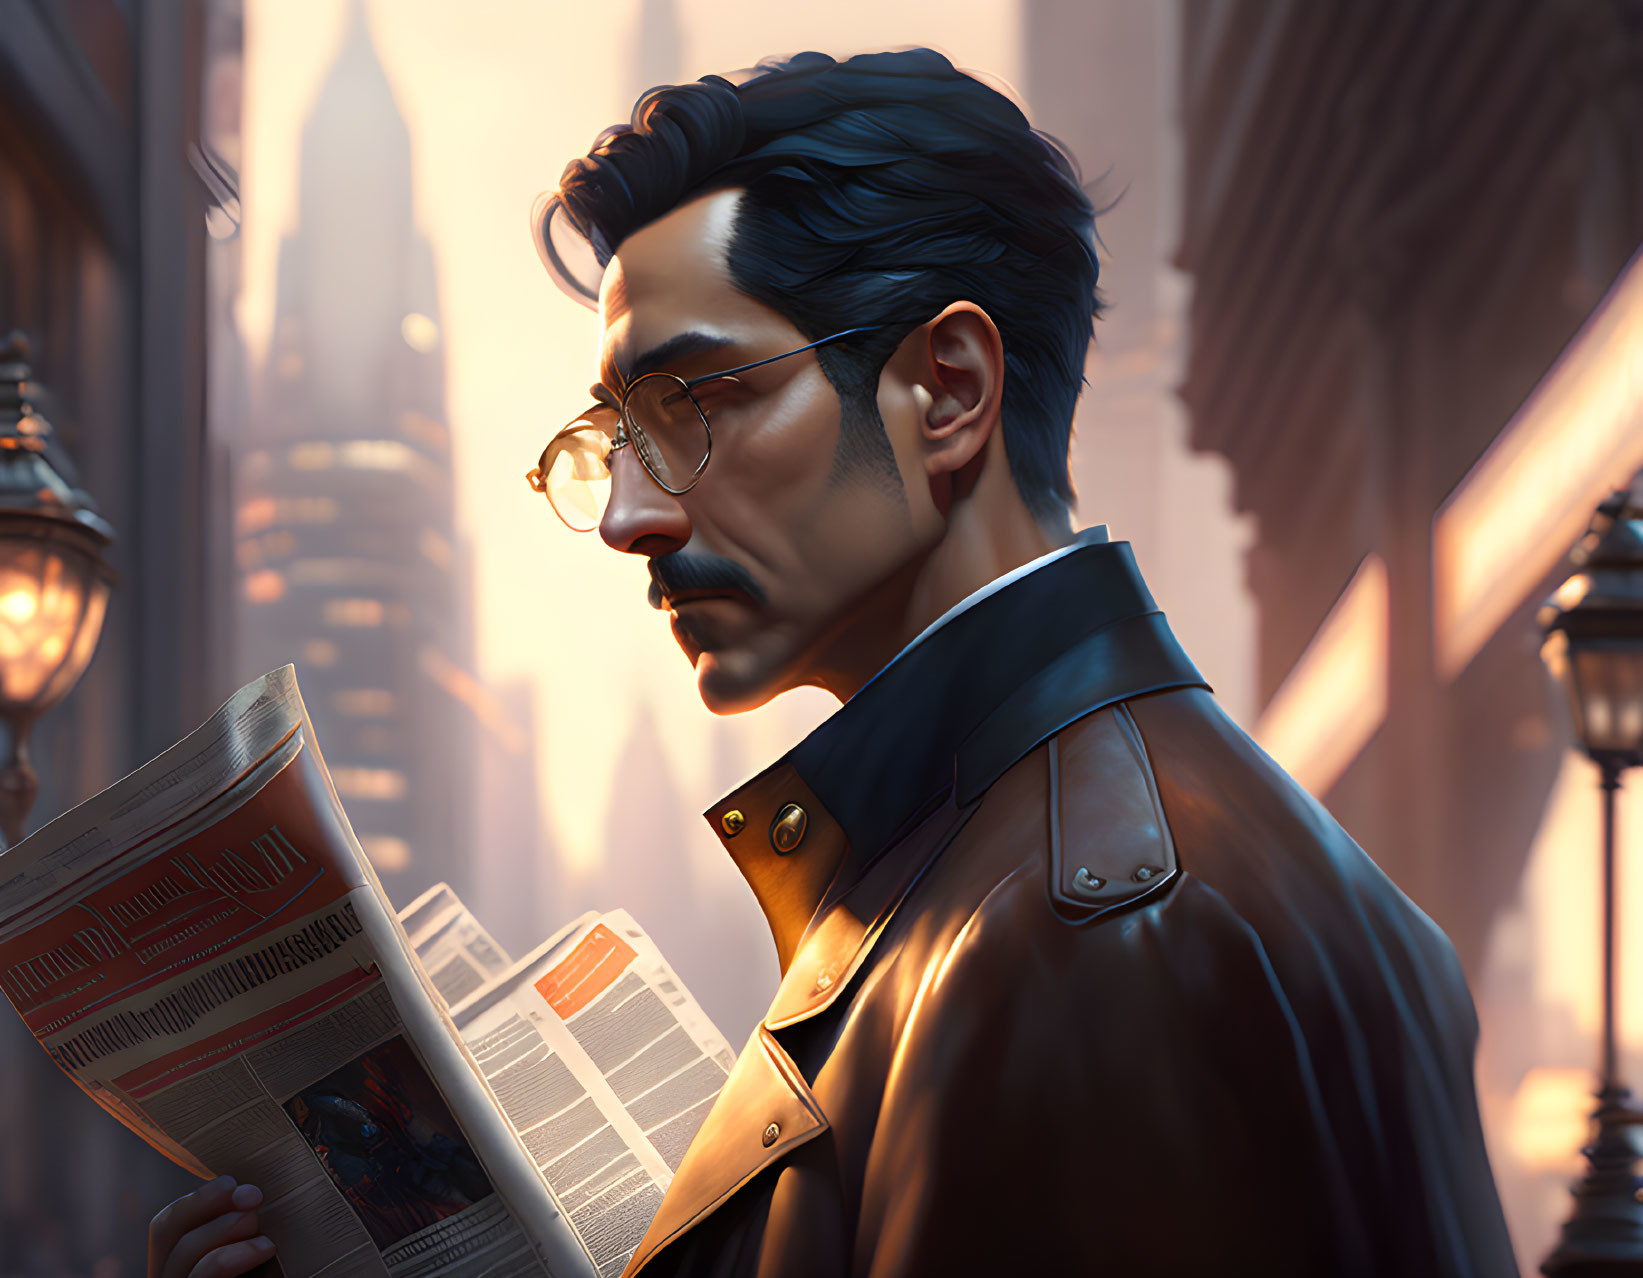 Digital Artwork: Distinguished Man with Mustache Reading Newspaper in Urban Setting